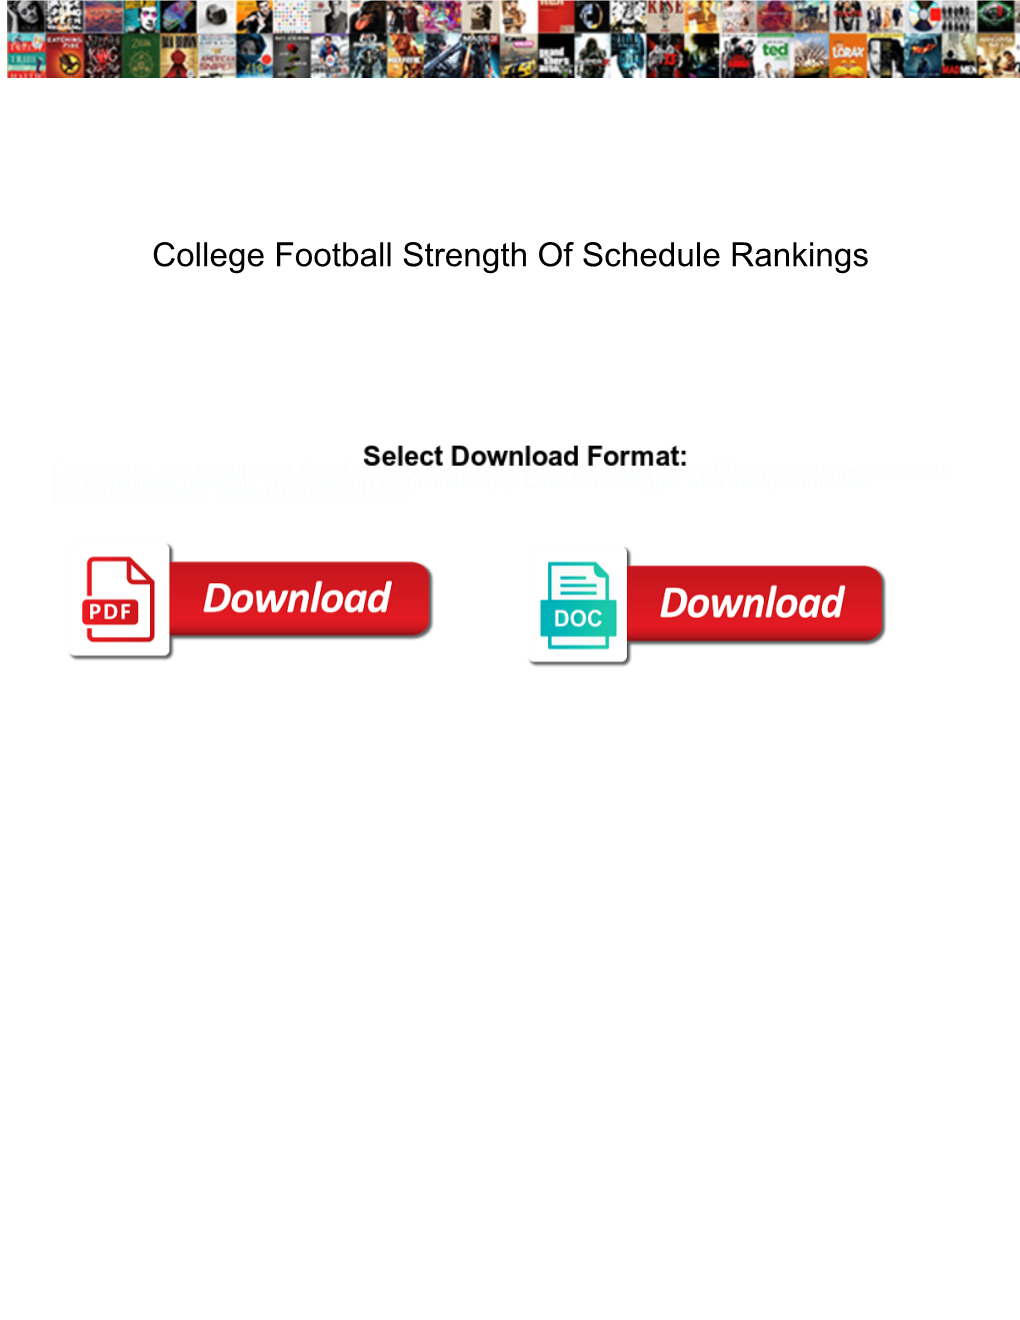 College Football Strength of Schedule Rankings